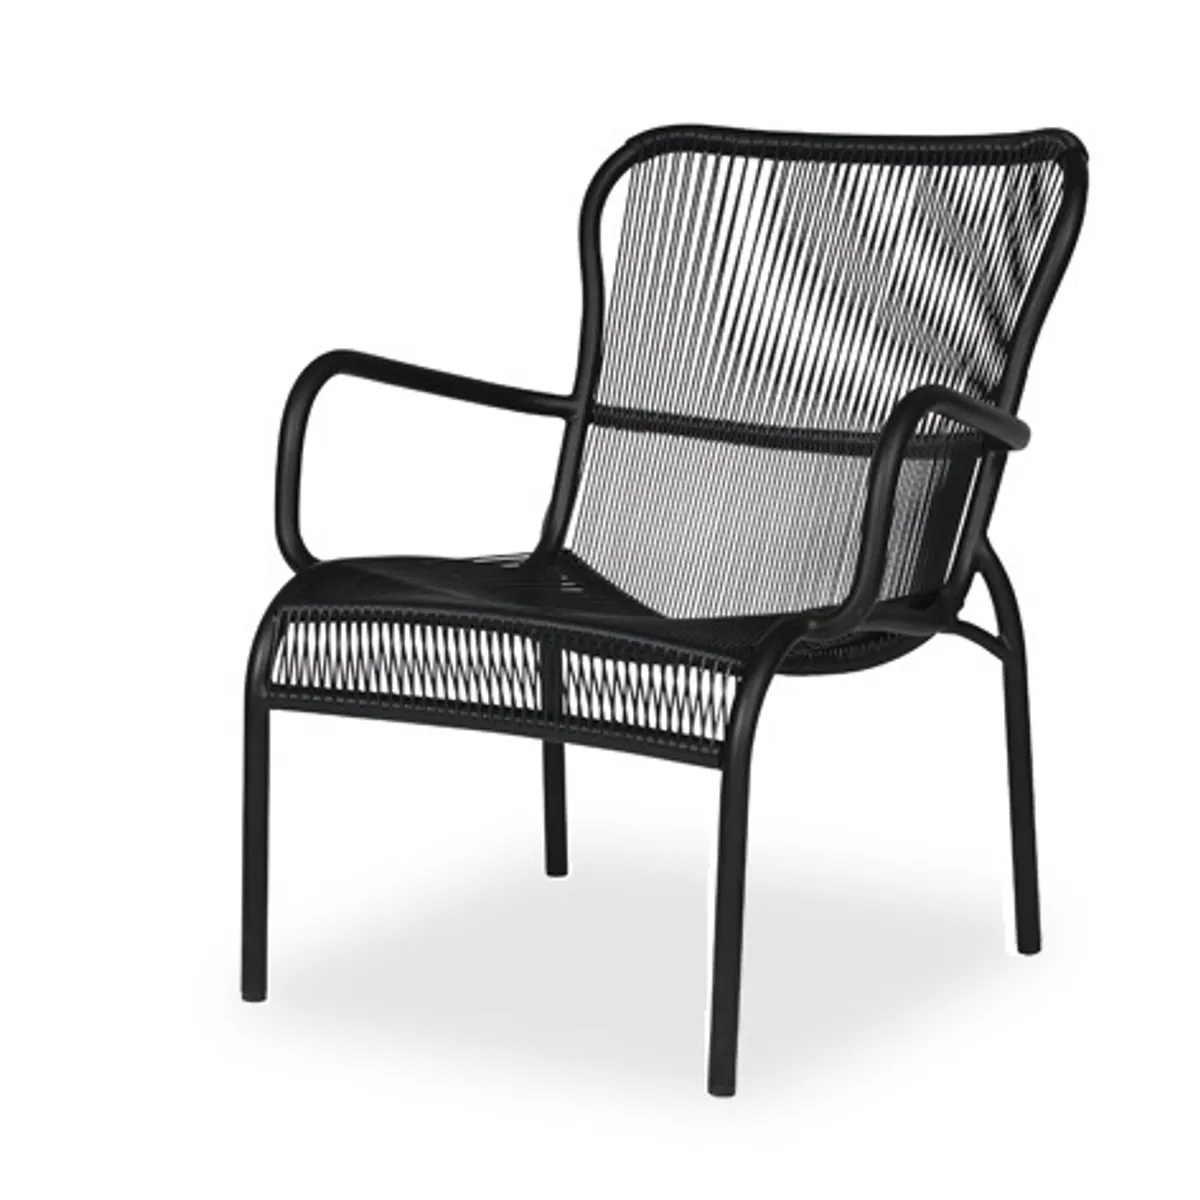 Ulysses Lounge Chair 9